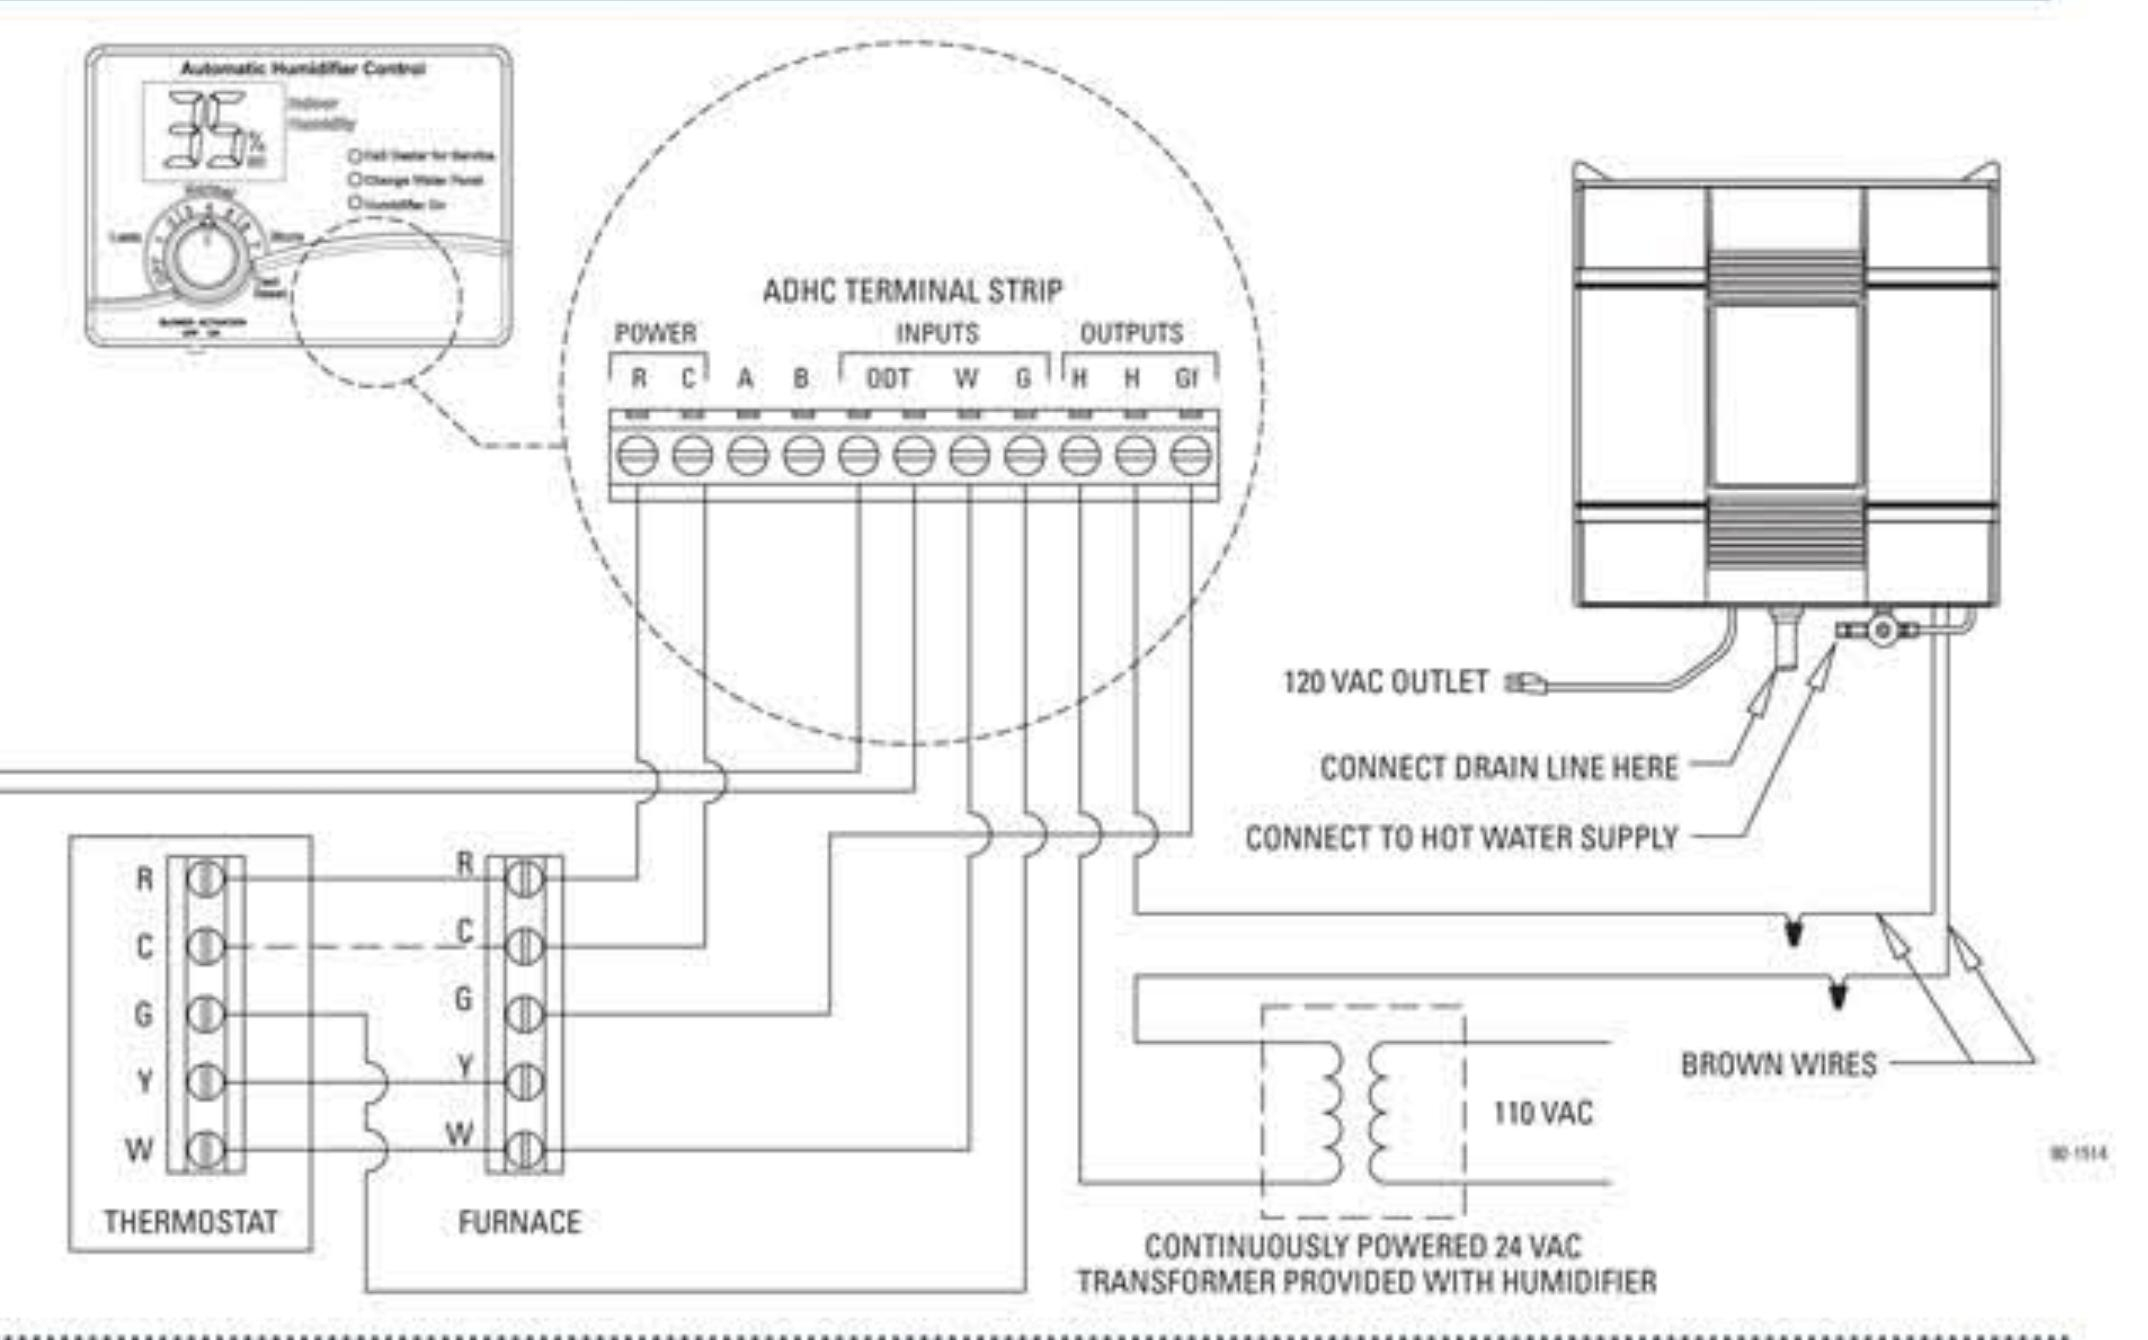 Humidifier Aprilaire 600 Wiring Diagram | Wiring Diagram - Aprilaire 600 Wiring Diagram